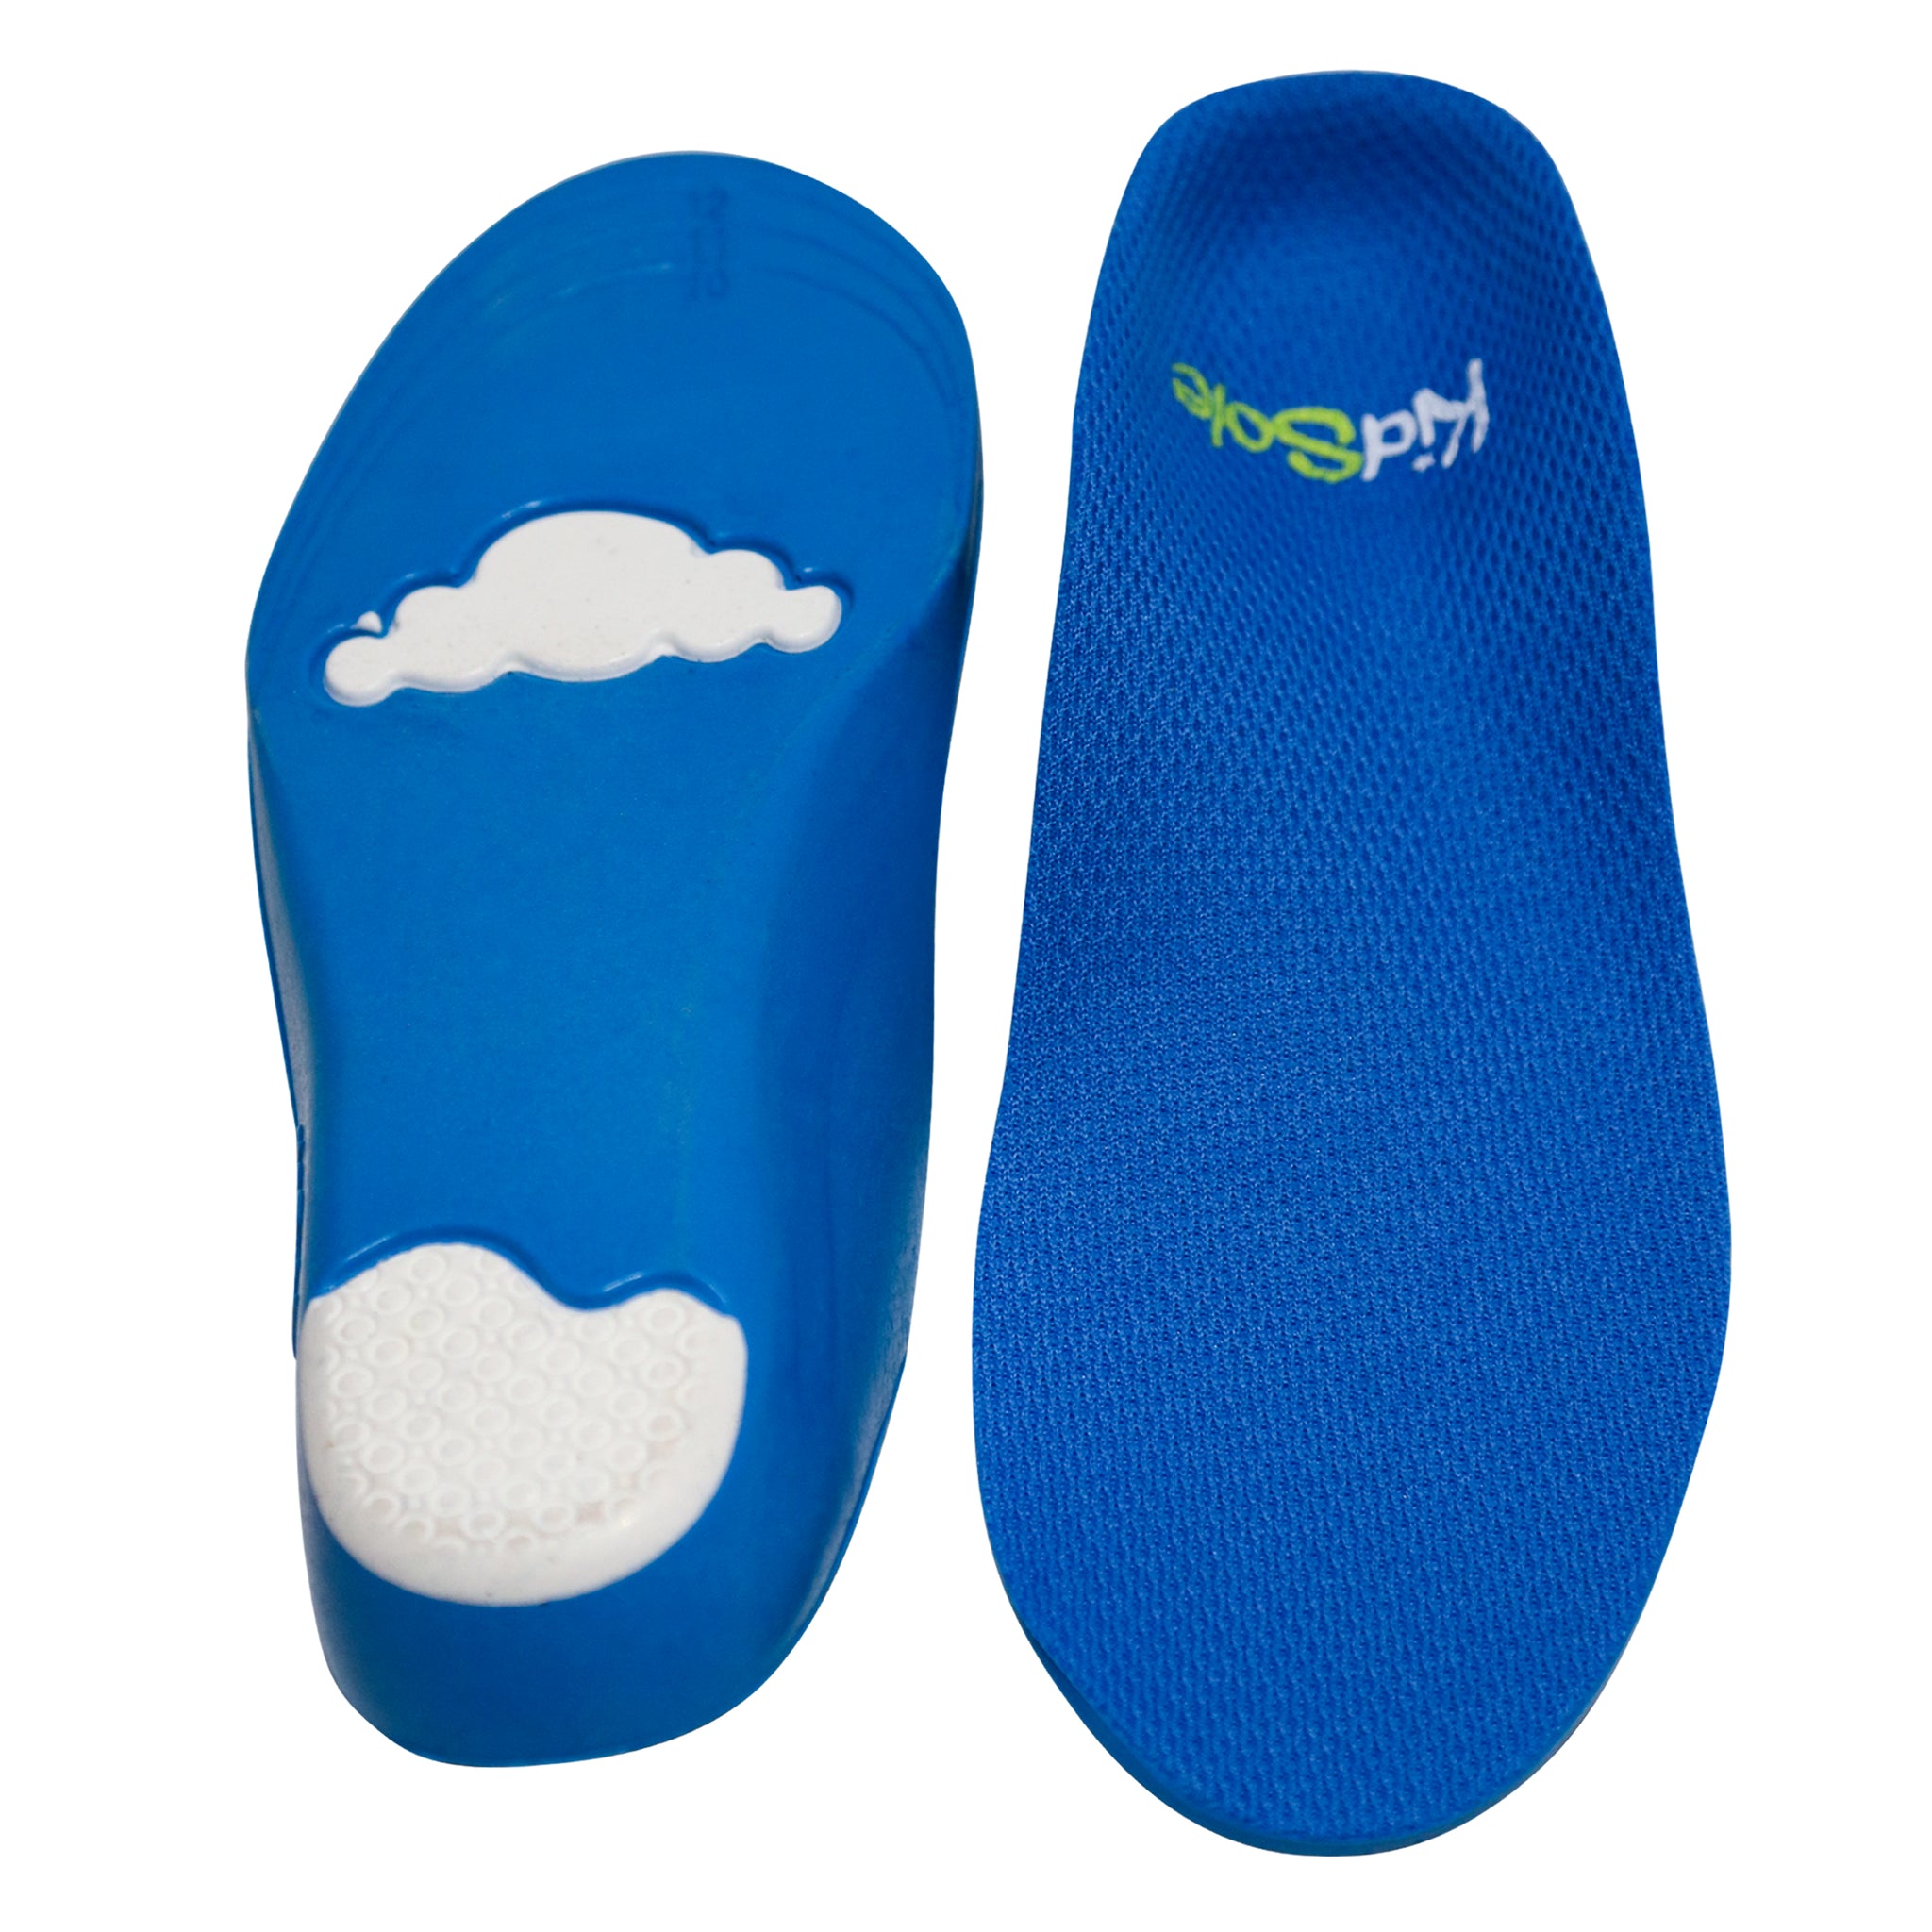 Arch Cloud Orthotic Insole - High Arch Support